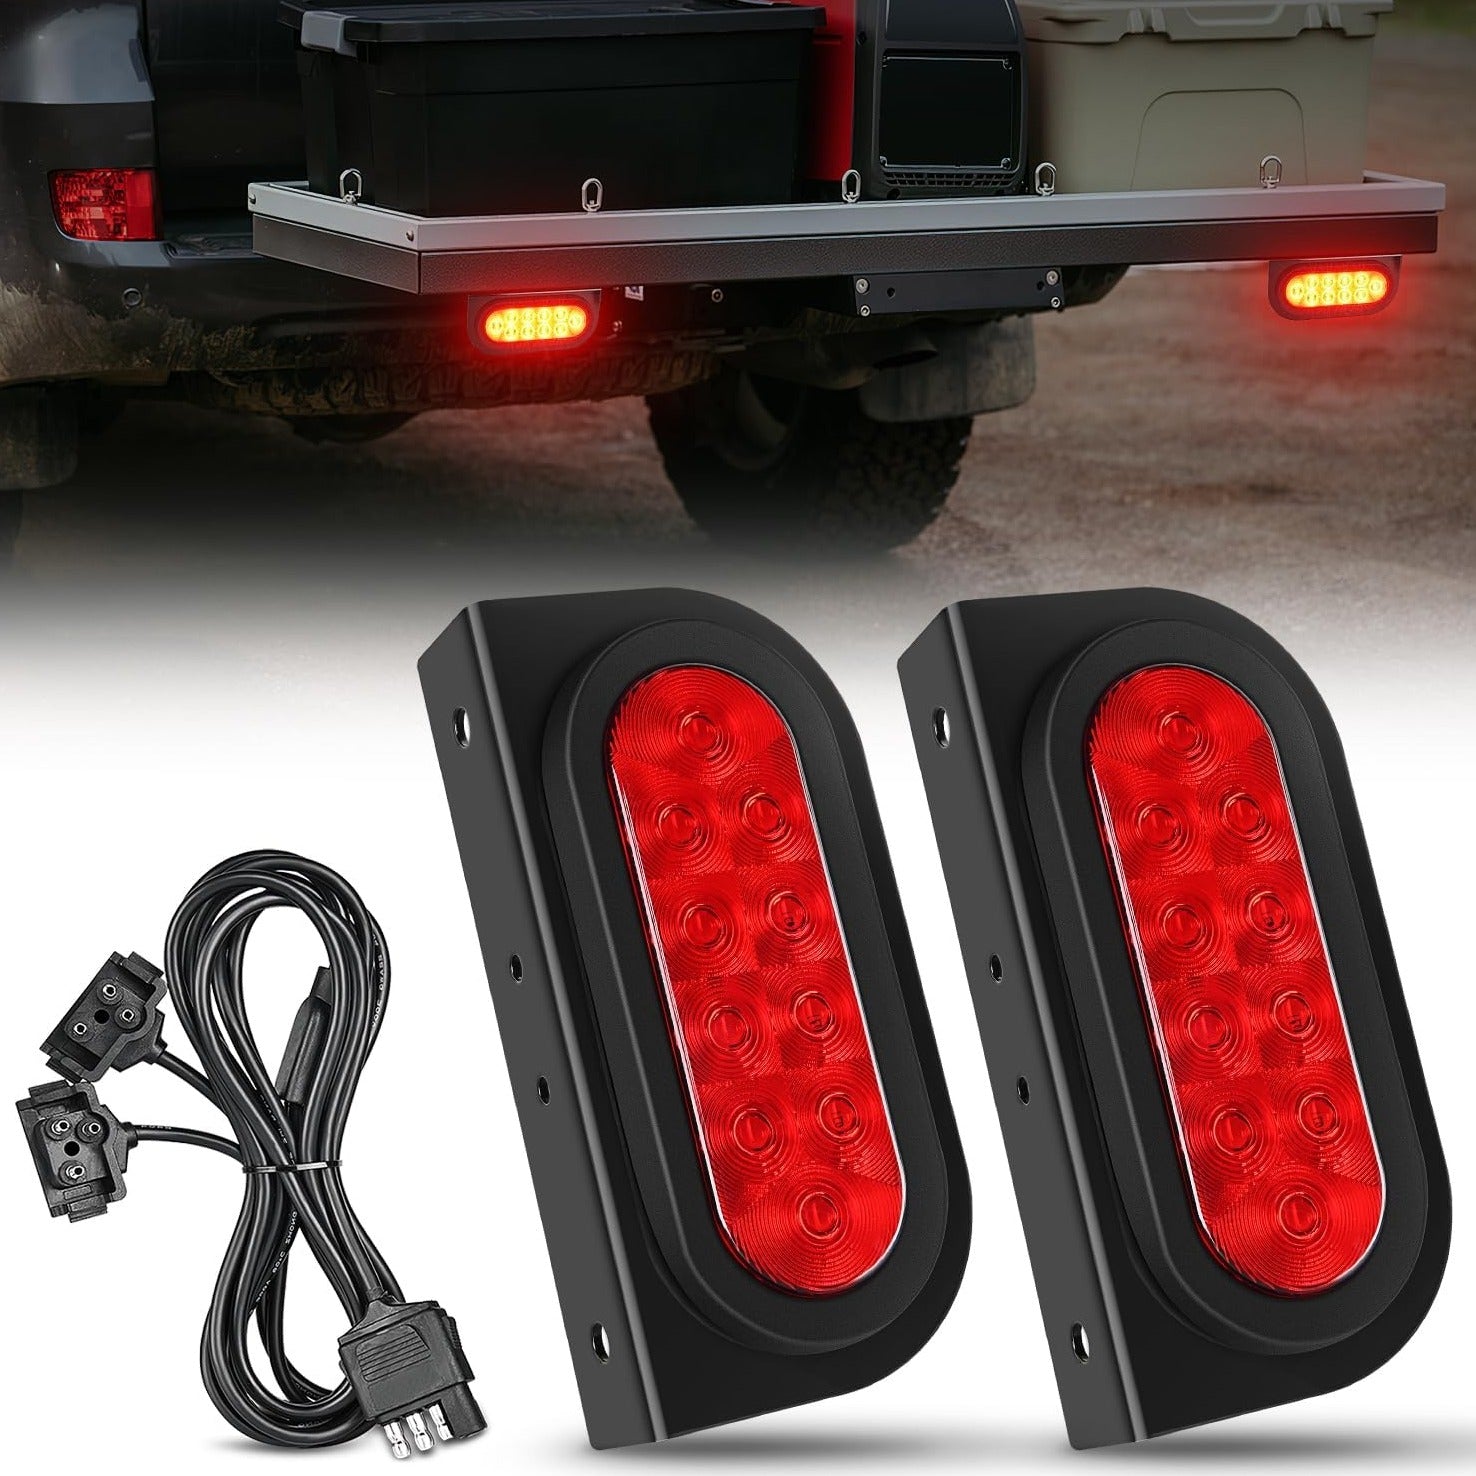 6" Oval Red LED Hitch Cargo Carrier Trailer Tail Lights W/ Flush Mount Grommets Wire Harness (Pair) Nilight